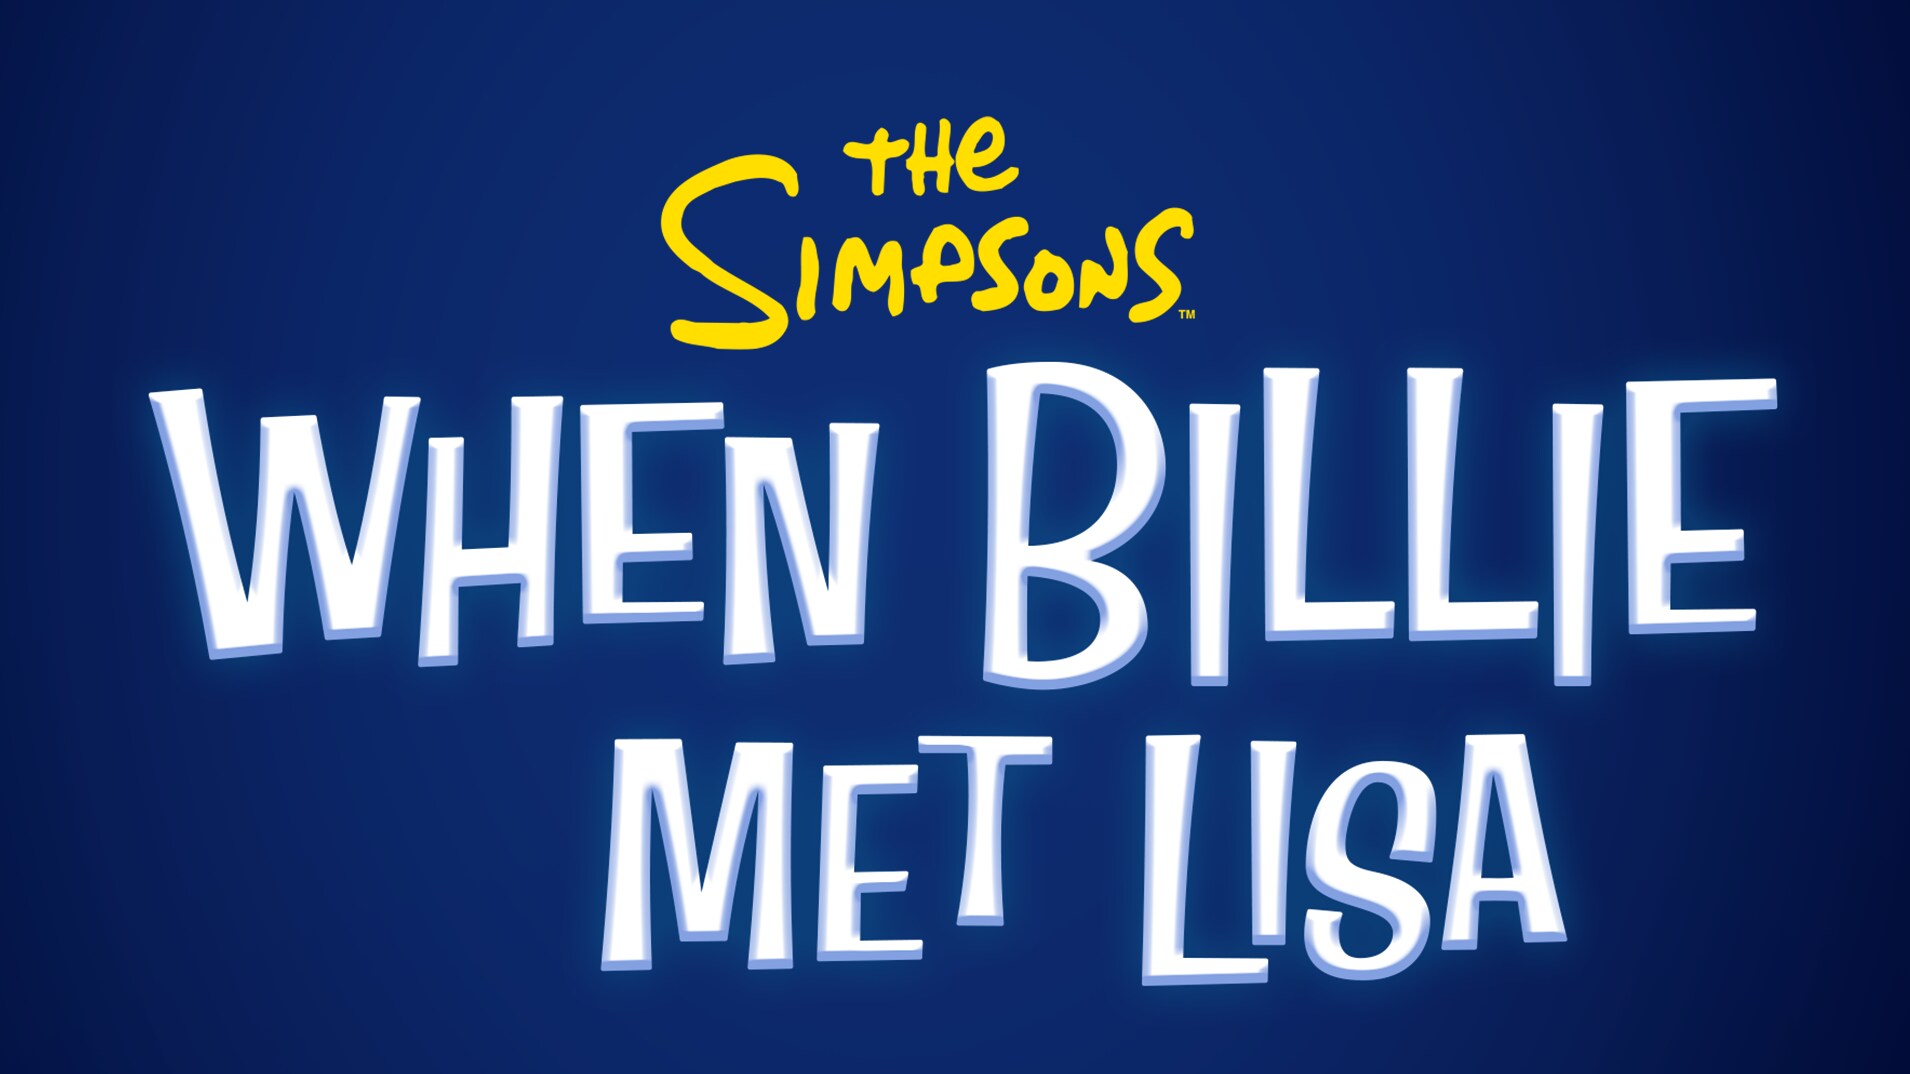 “THE SIMPSONS” FANS WILL BE HAPPIER THAN EVER WHEN THE NEW SHORT “WHEN BILLIE MET LISA” PREMIERES APRIL 22, EXCLUSIVELY ON DISNEY+